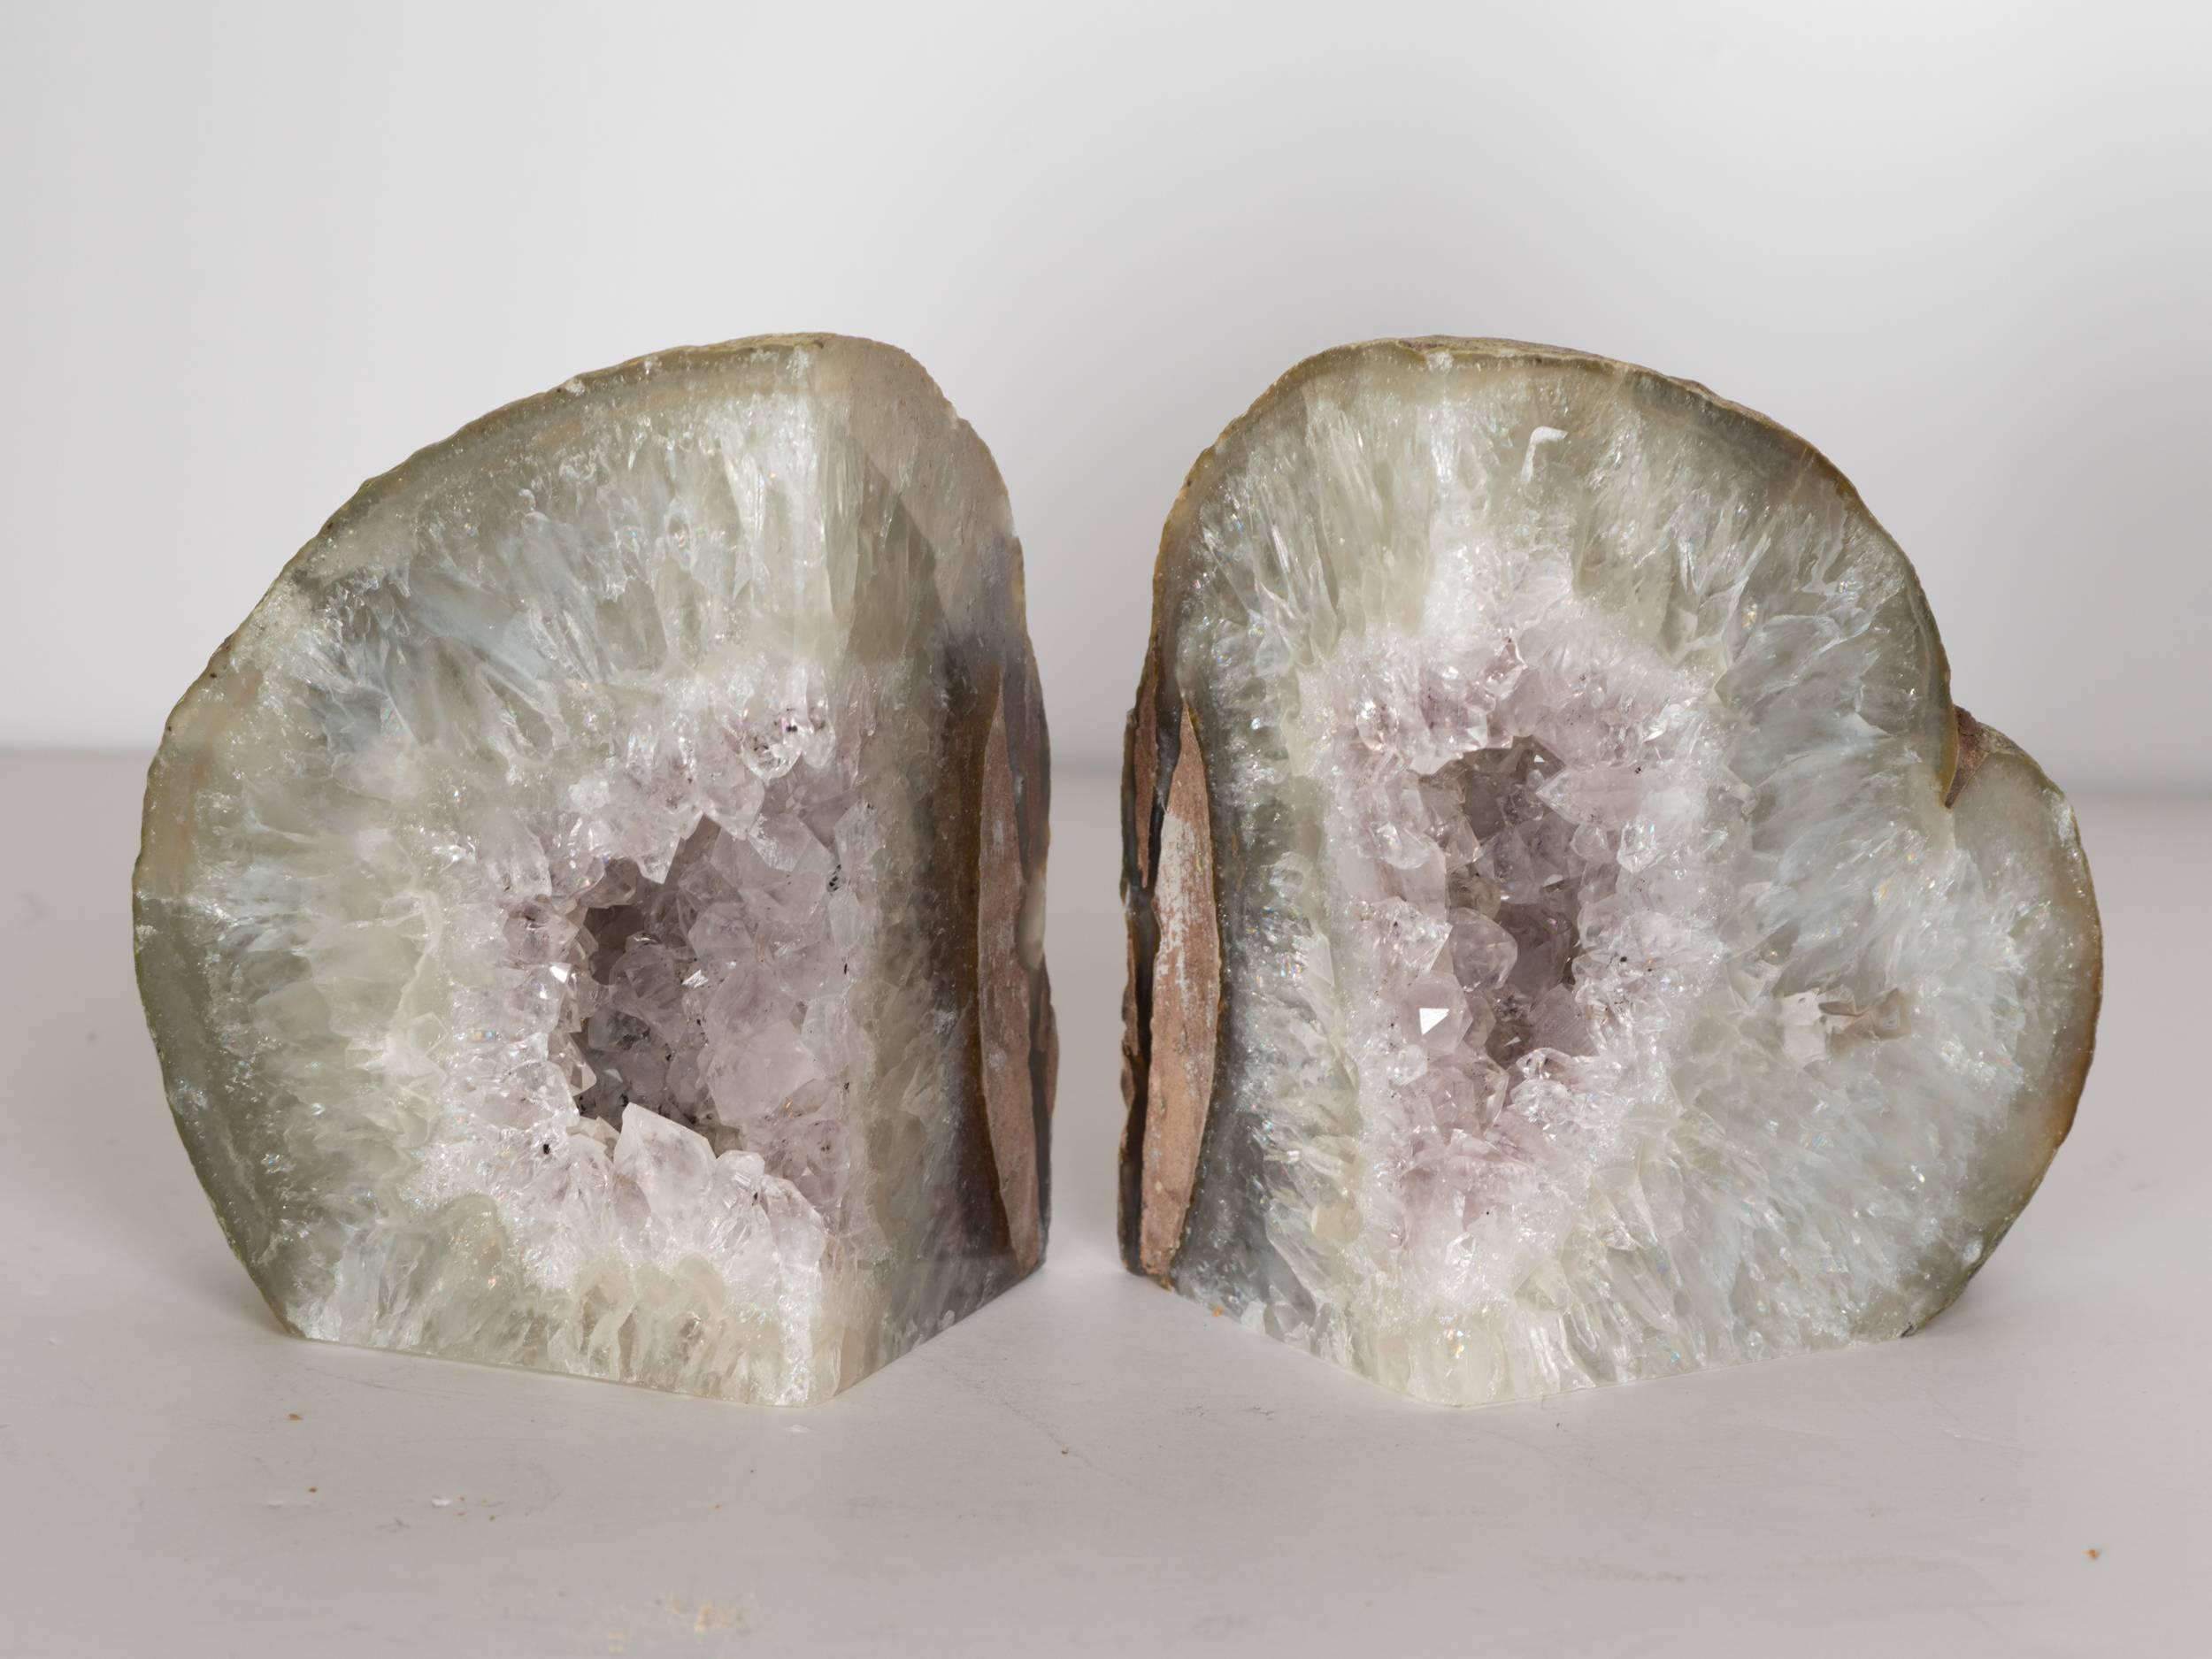 Outstanding pair of natural quartz crystal bookends with solid polished fronts and rough exterior edges. Sculptural shape in variant shades of grey and white, with exquisite amethyst crystal centers in hues of pale violet. Beautiful from all angles